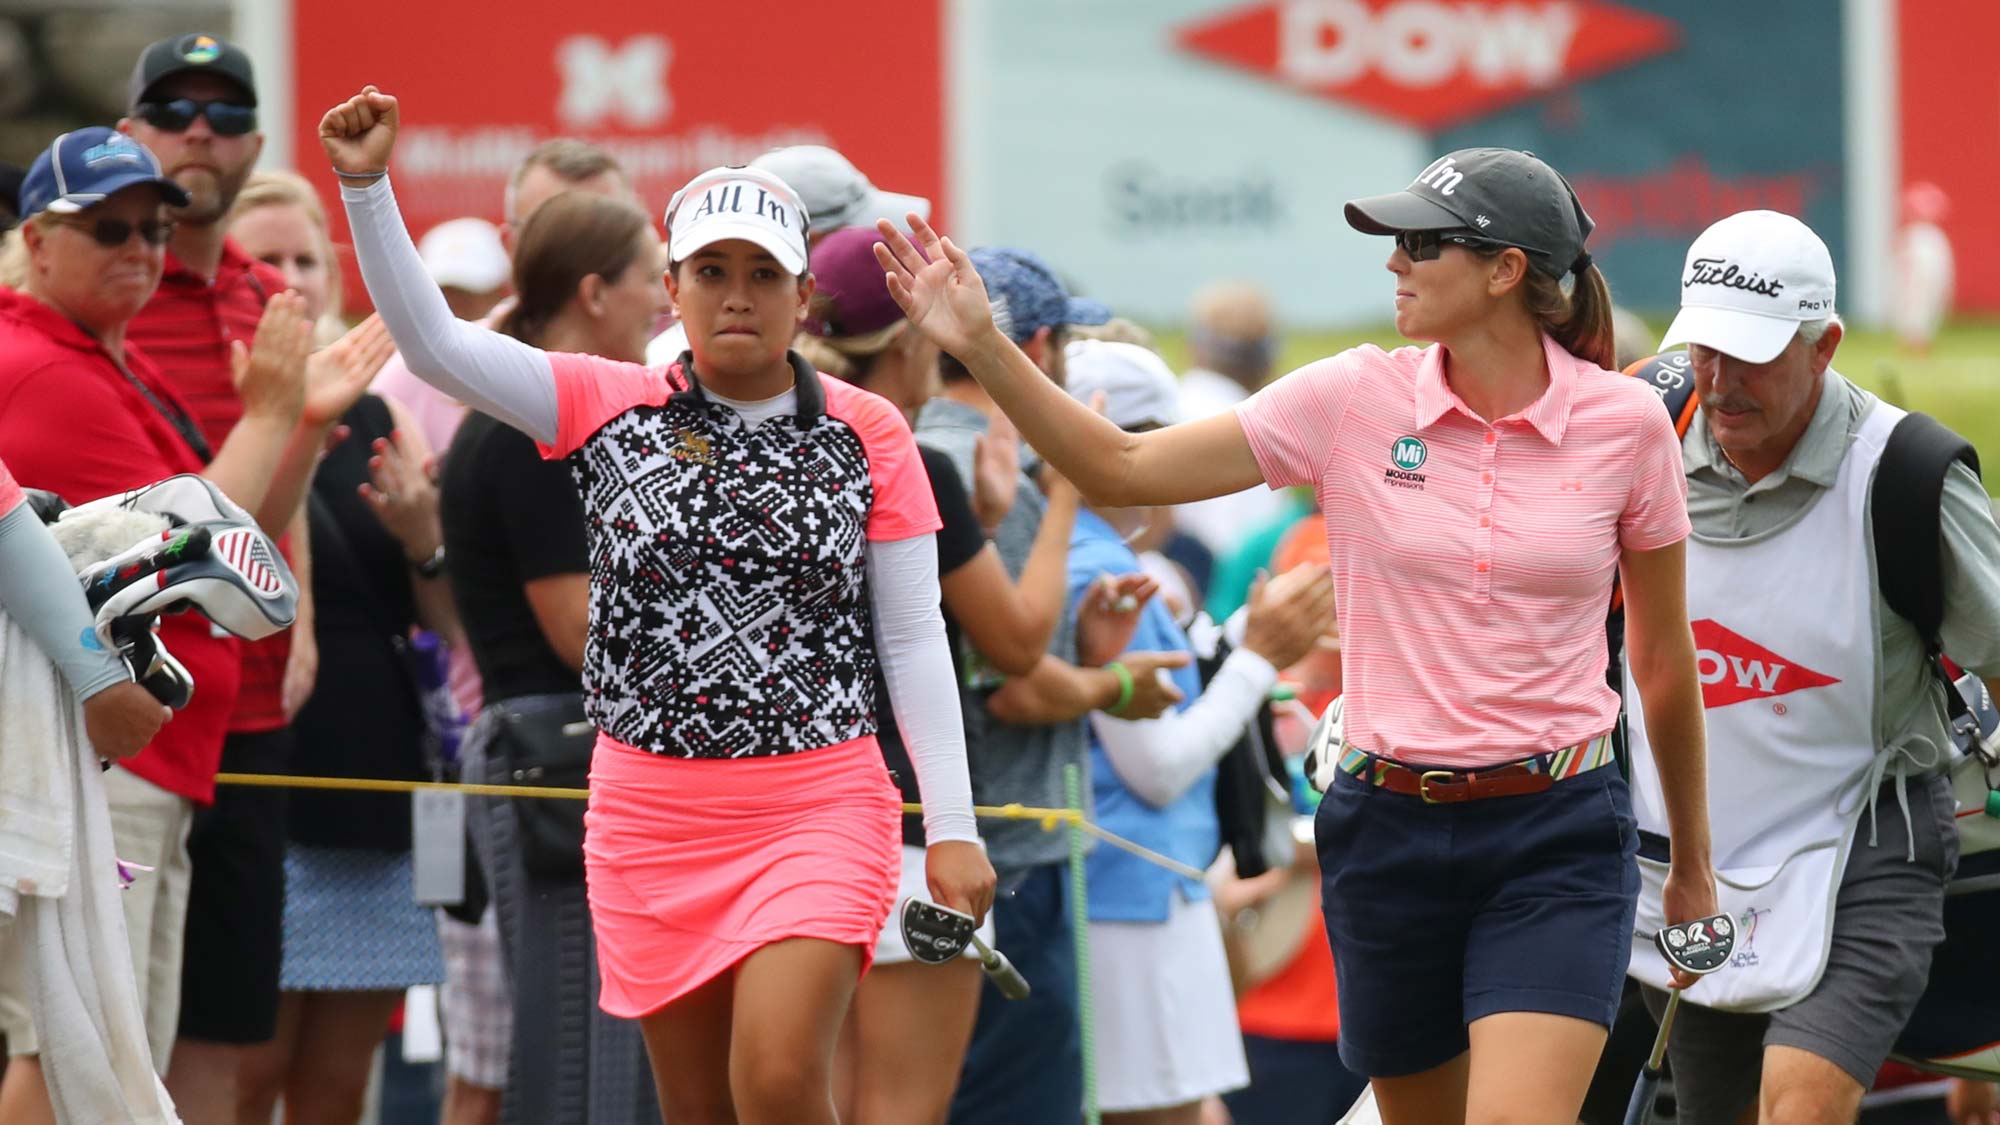 Teammates Cydney Clanton of the United States (R) and Jasmine Suwannapura of Thailand walk to the 18th green during the final round of the Dow Great Lakes Bay Invitational 